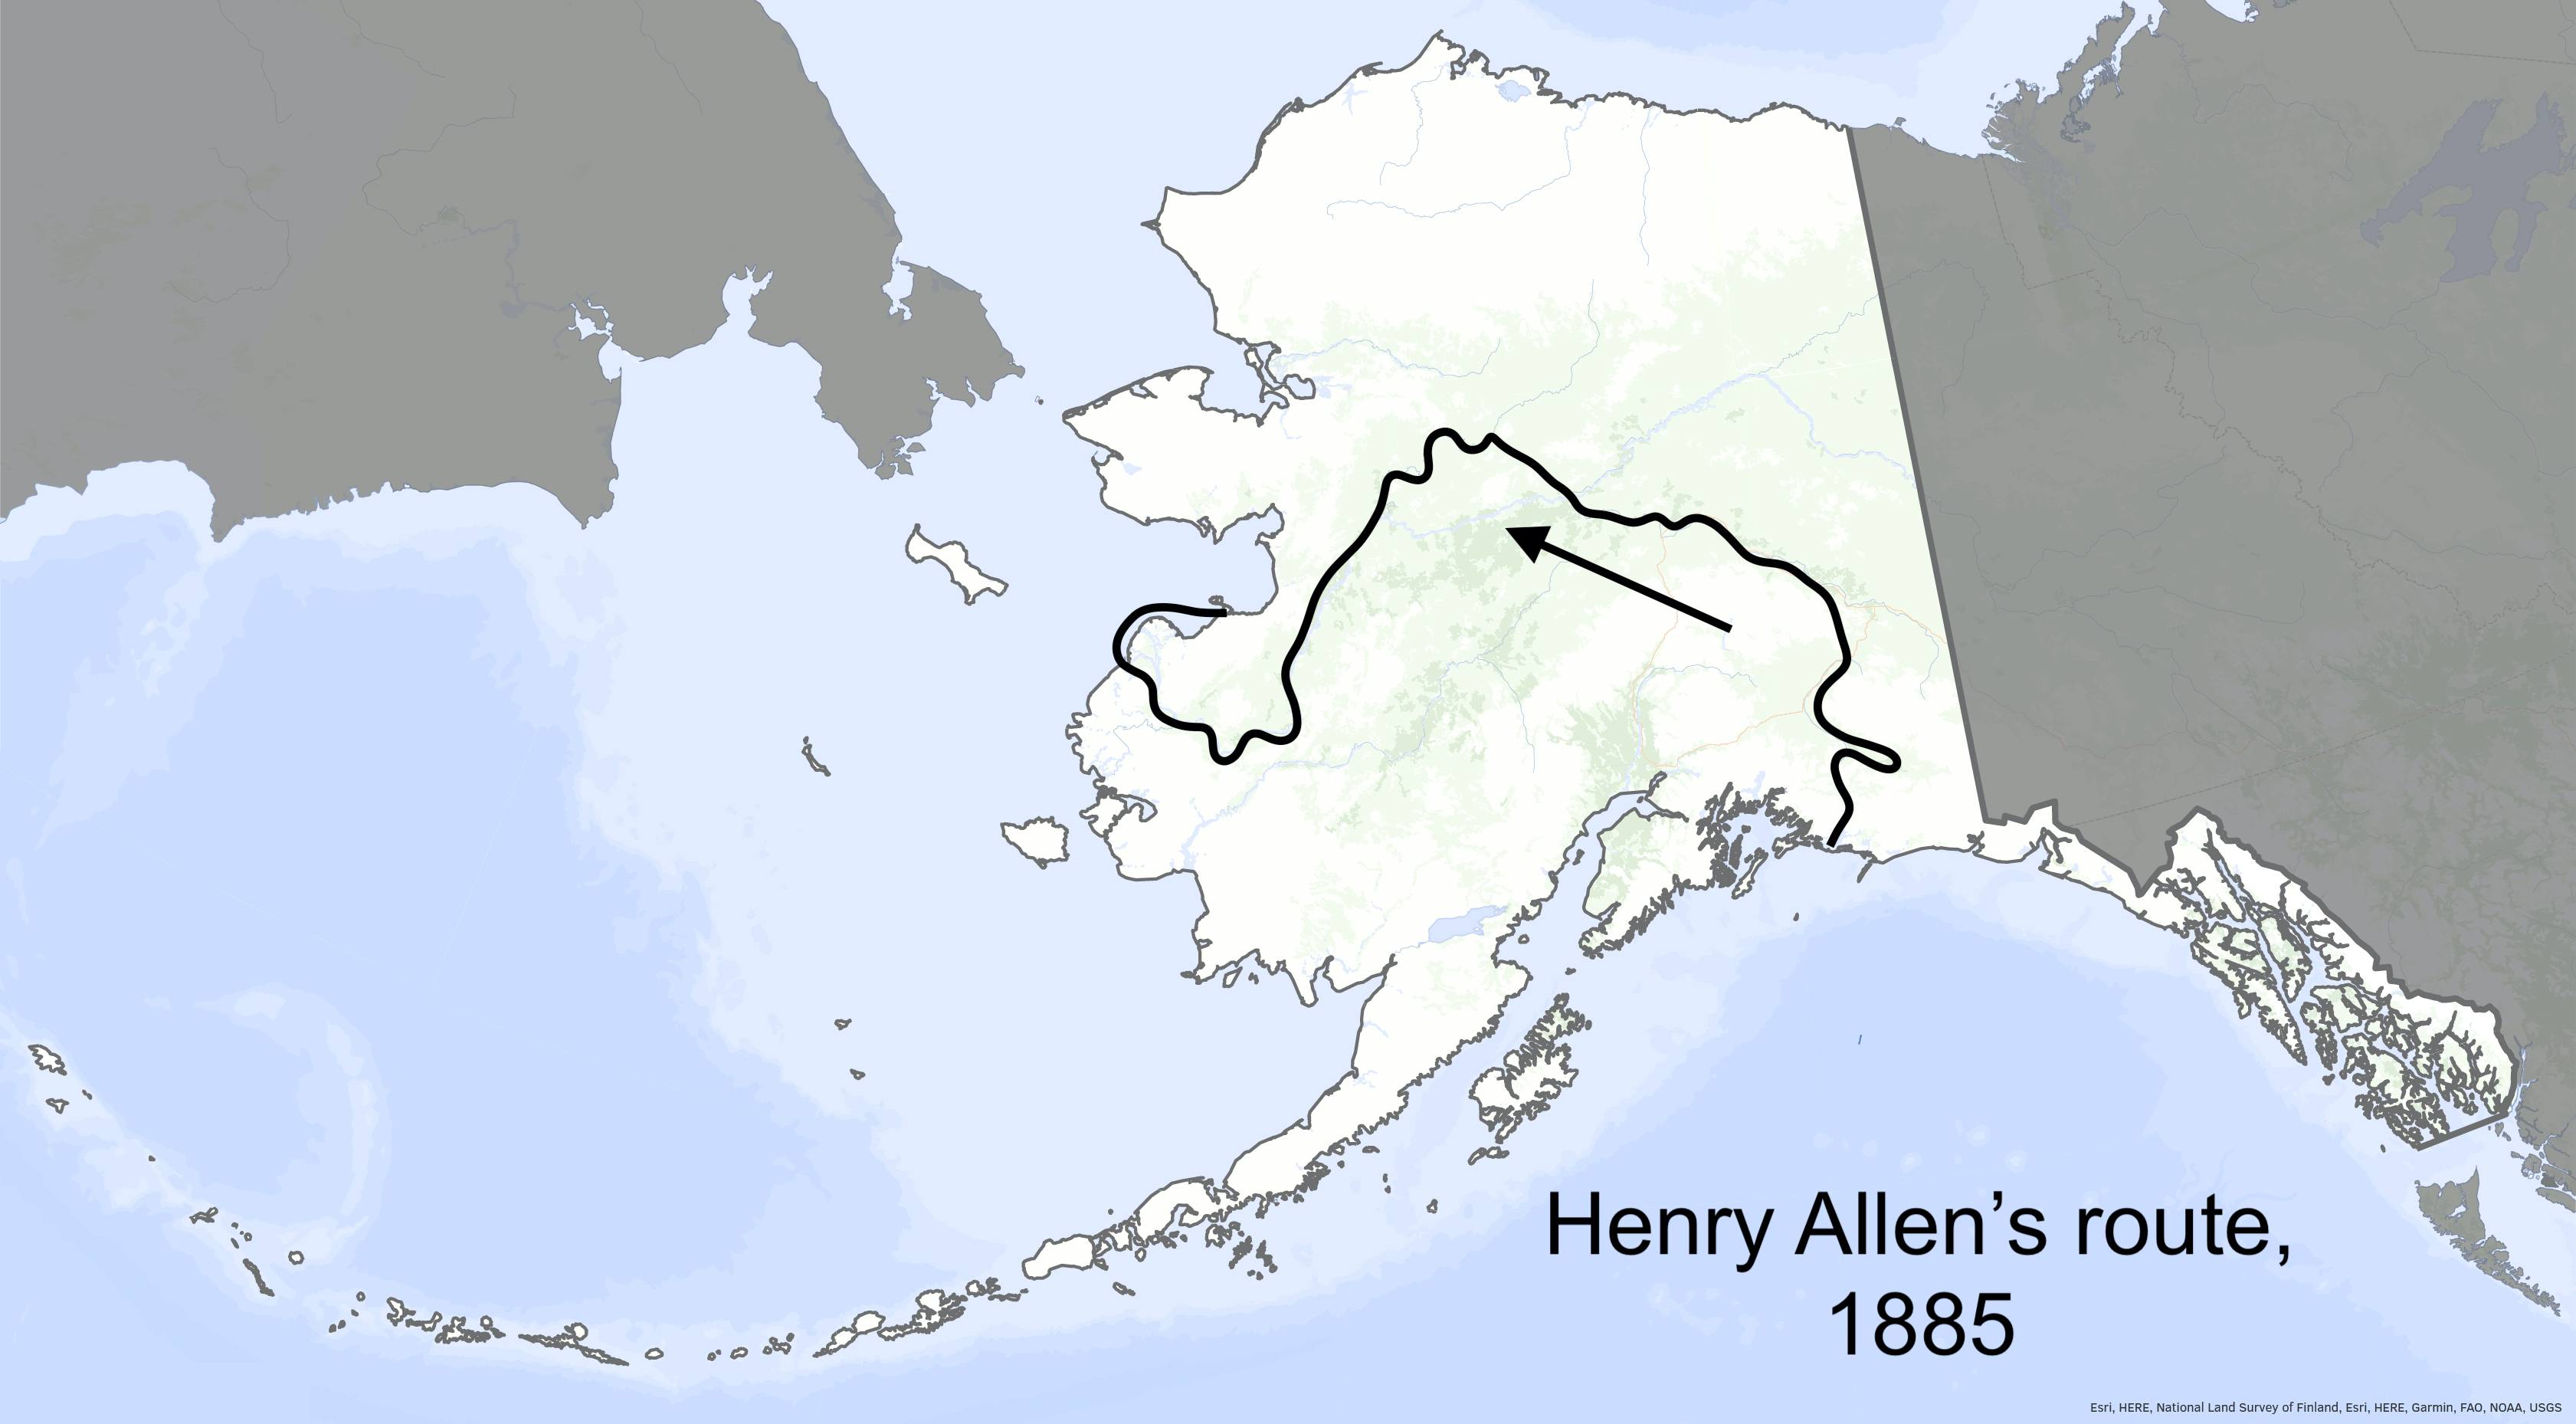 A map of Alaska shows Lt. Henry Allen's exploration route from the southern coast northward into the Cooper, Tanana and Koyukuk rivers and then southward and westward along the Yukon River.